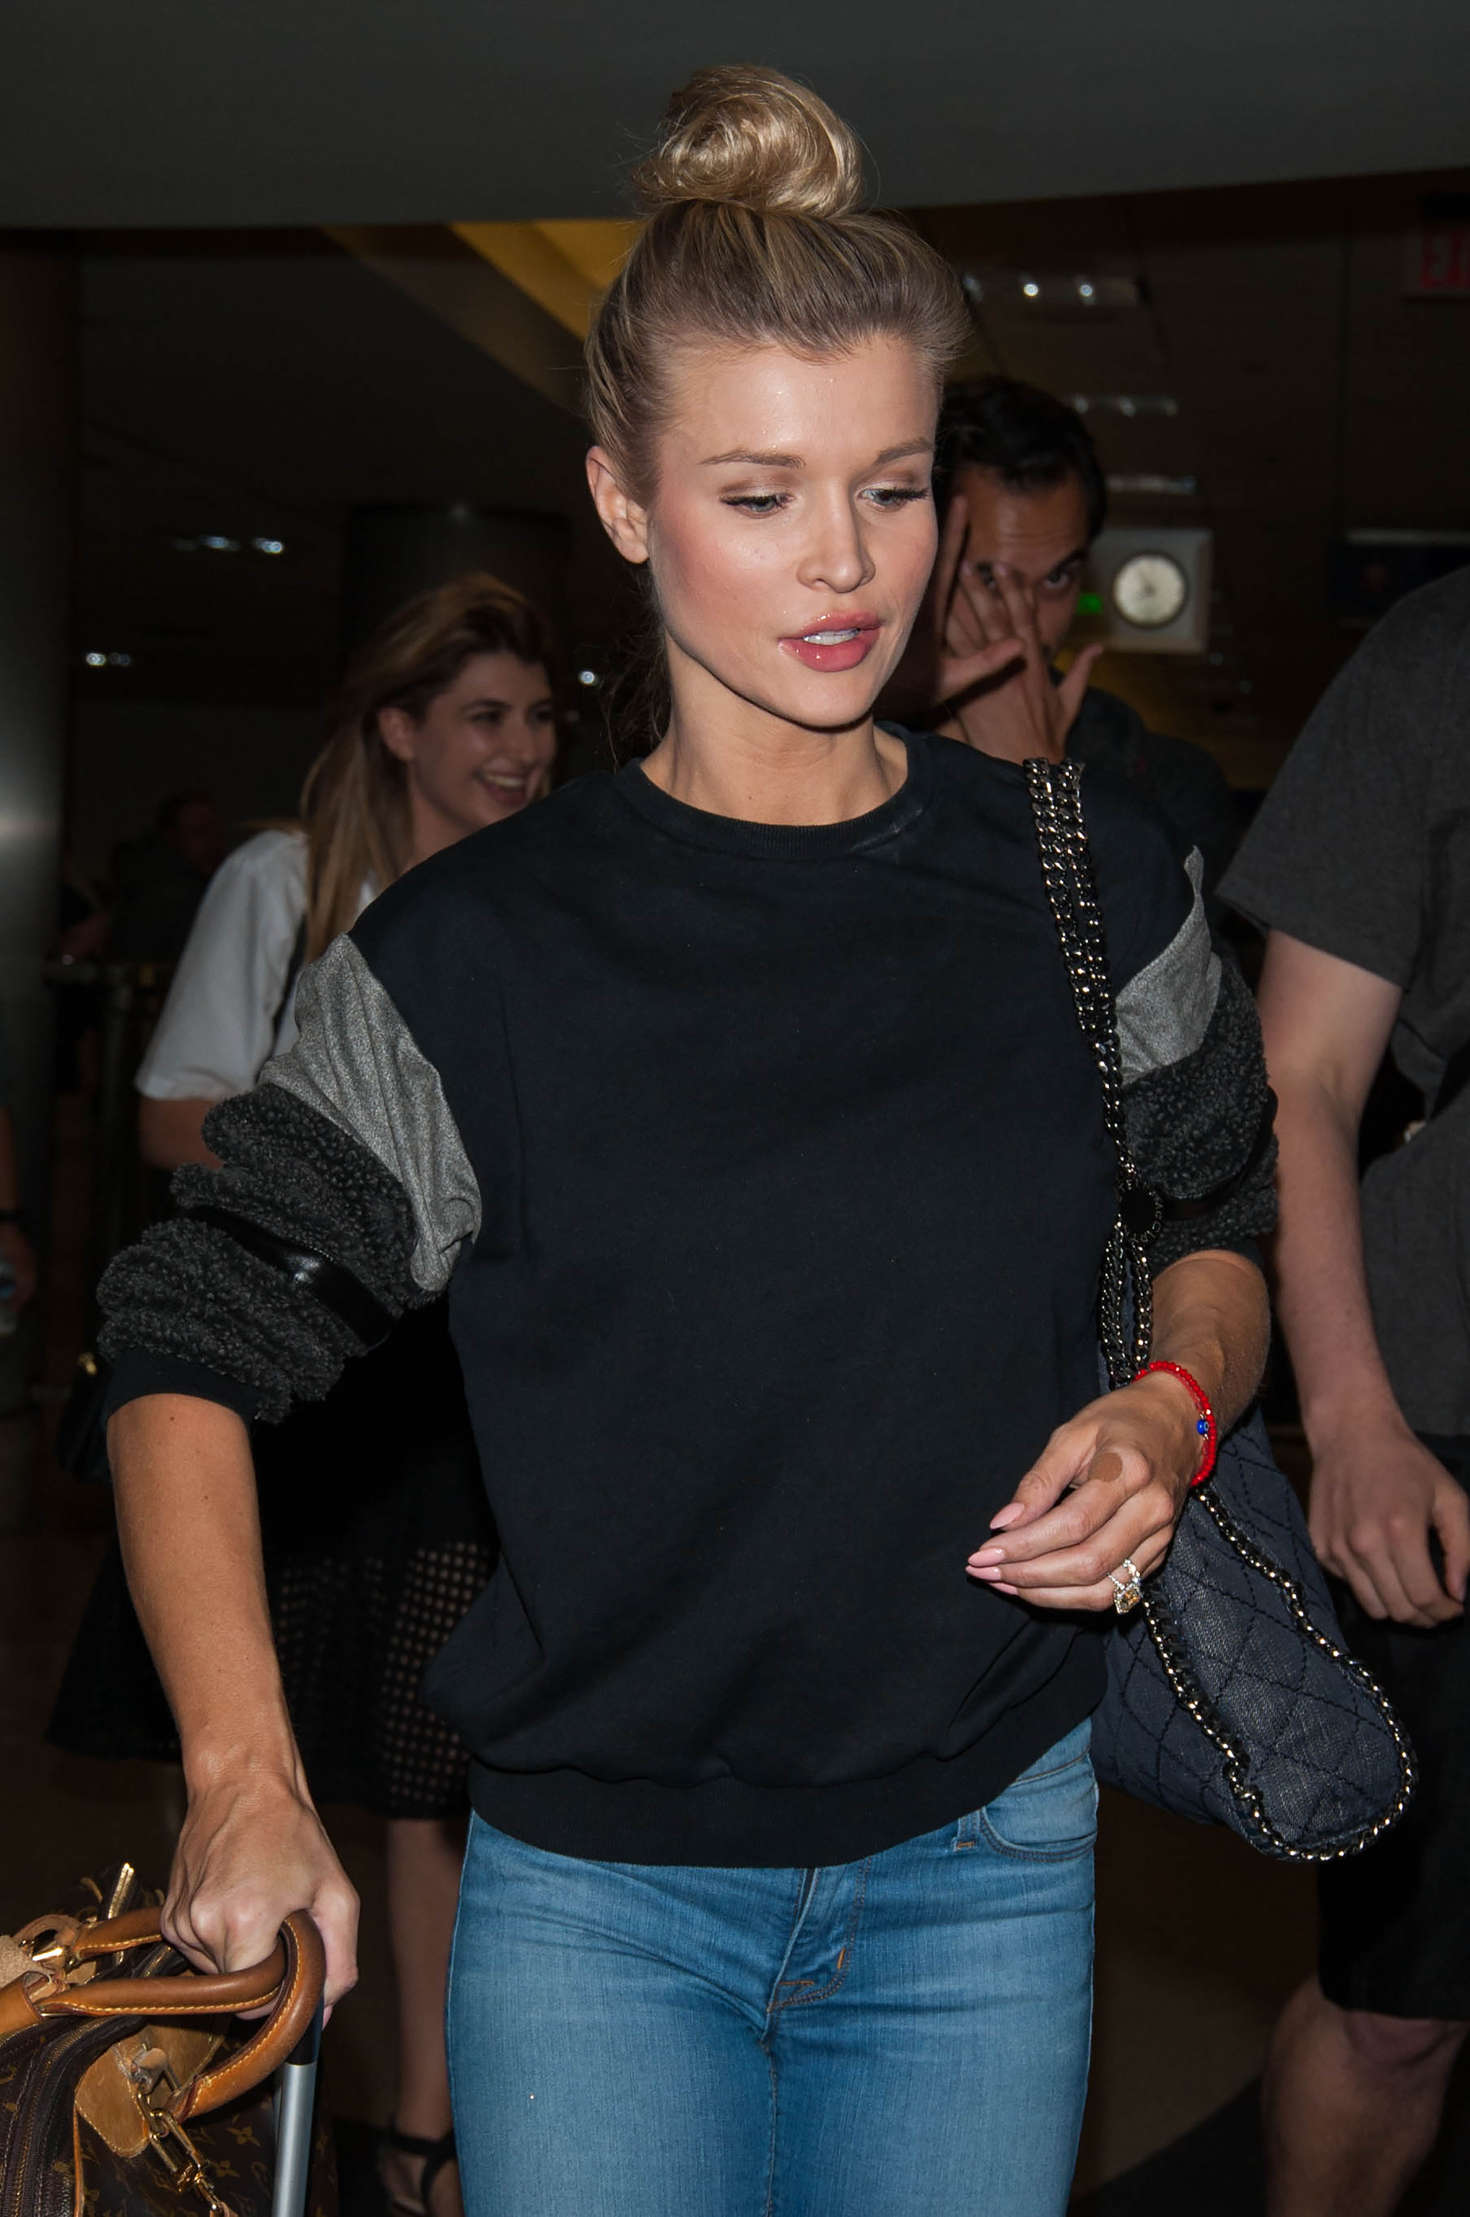 Joanna Krupa in Jedans at LAX Airport in Los Angeles